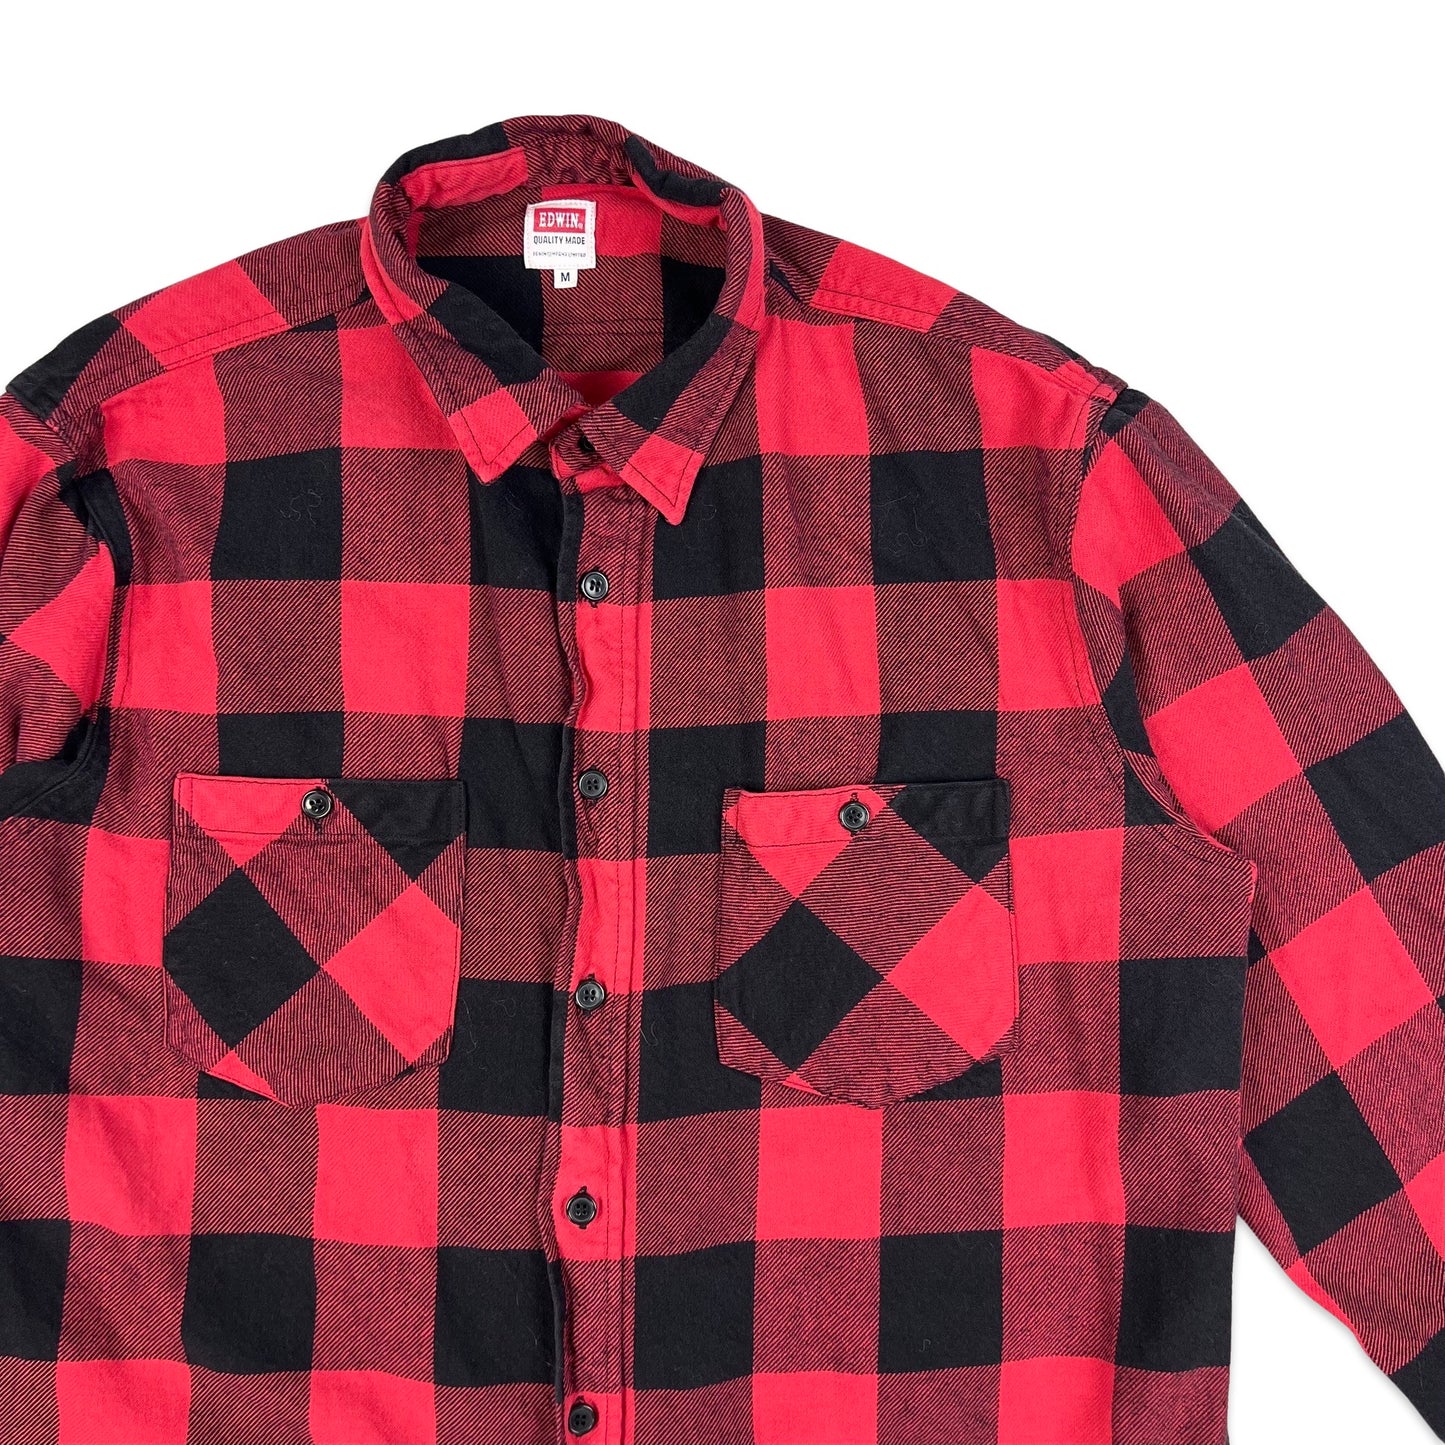 00s Vintage Red Black Check Edwin Flannel Shirt S M